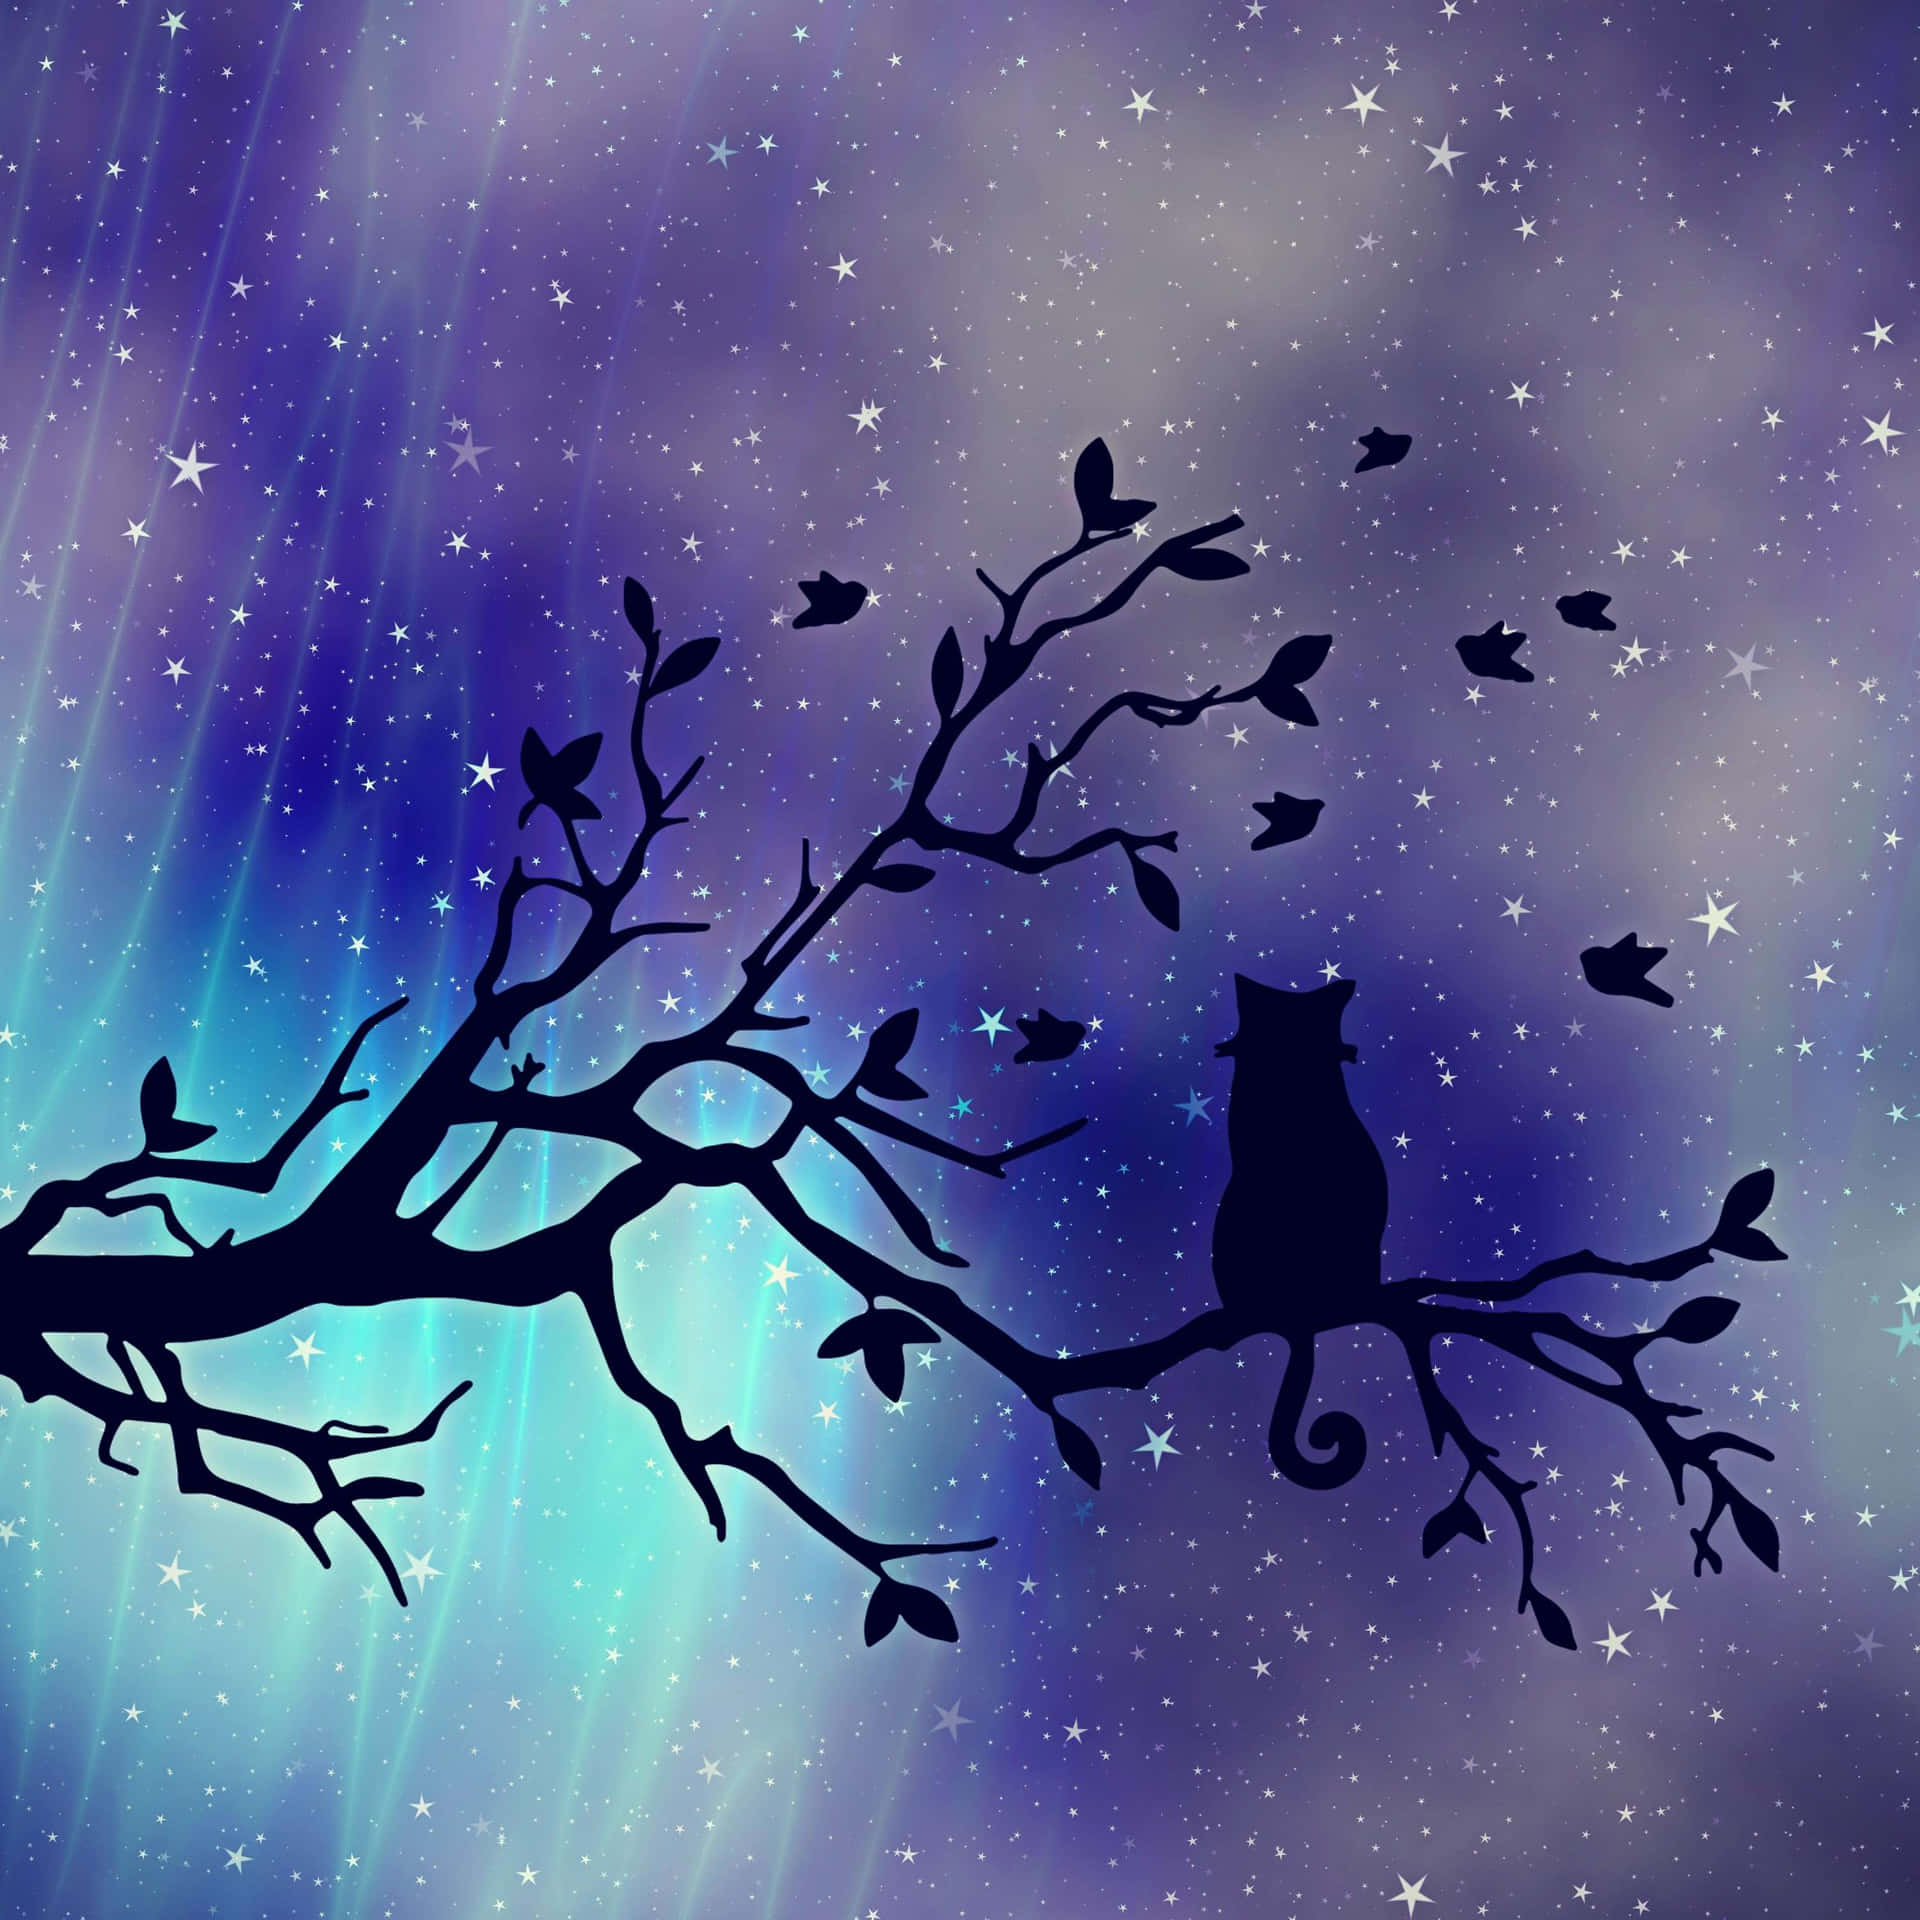 A Cat Sitting On A Tree Branch With Stars In The Sky Wallpaper